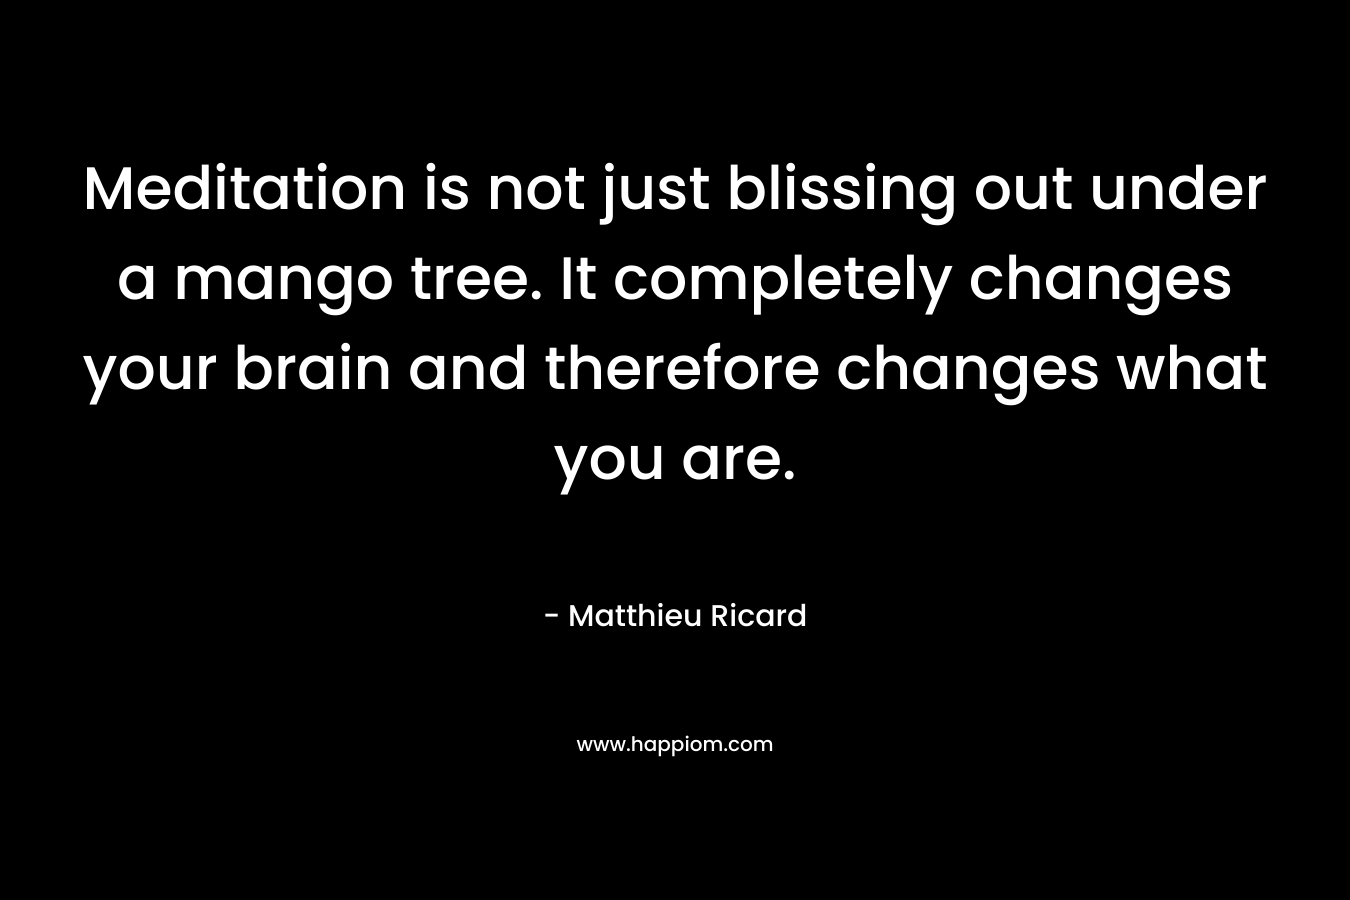 Meditation is not just blissing out under a mango tree. It completely changes your brain and therefore changes what you are.